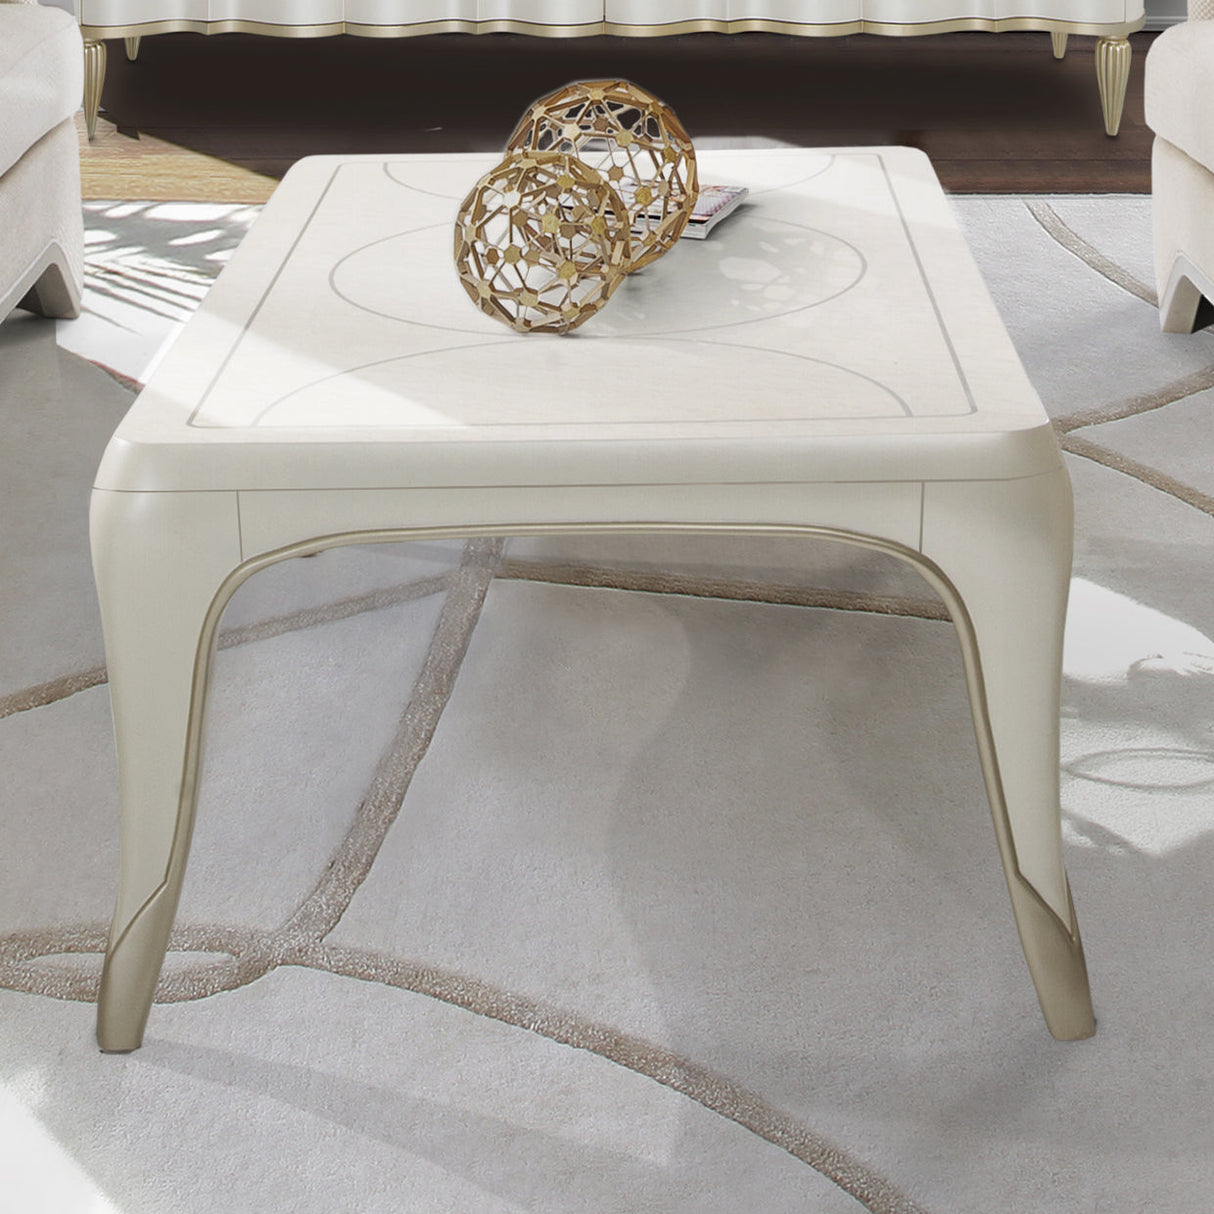 Aico Furniture - London Place 3 Piece Occasional Table Set In Creamy Pearl - Nc9004201-202-112